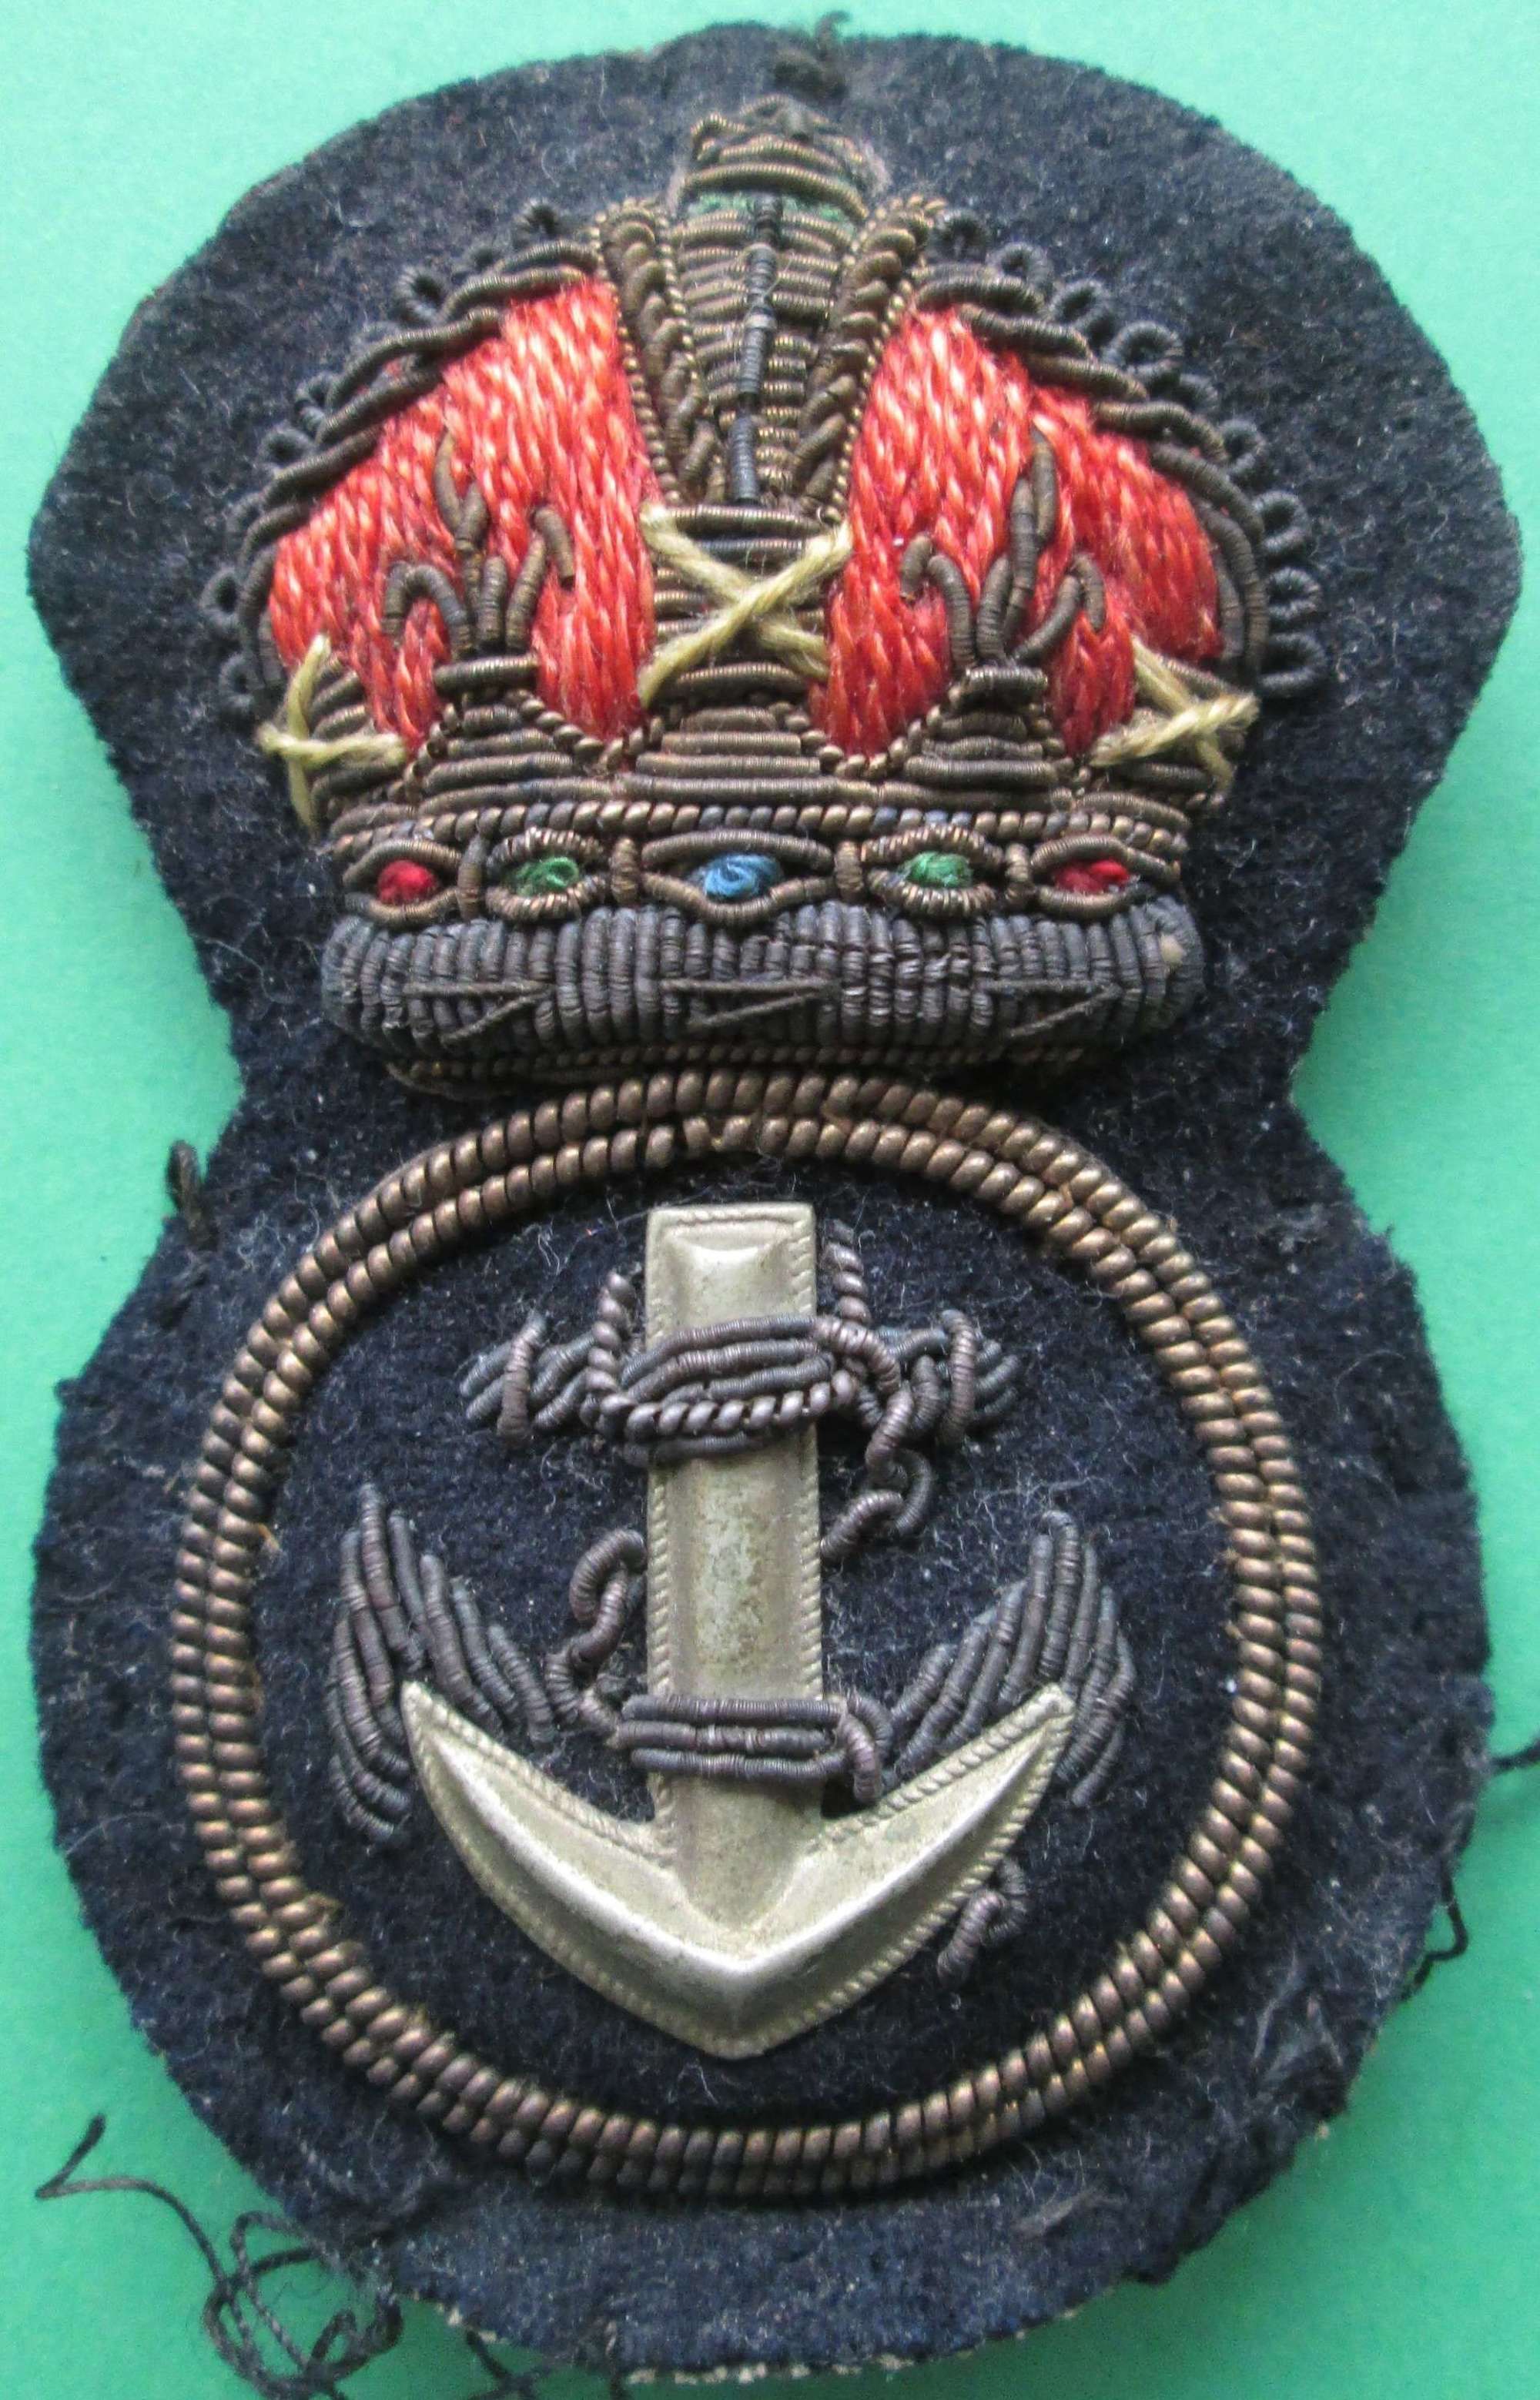 A NAVAL CHIEF PETTY OFFICER'S CAP BADGE